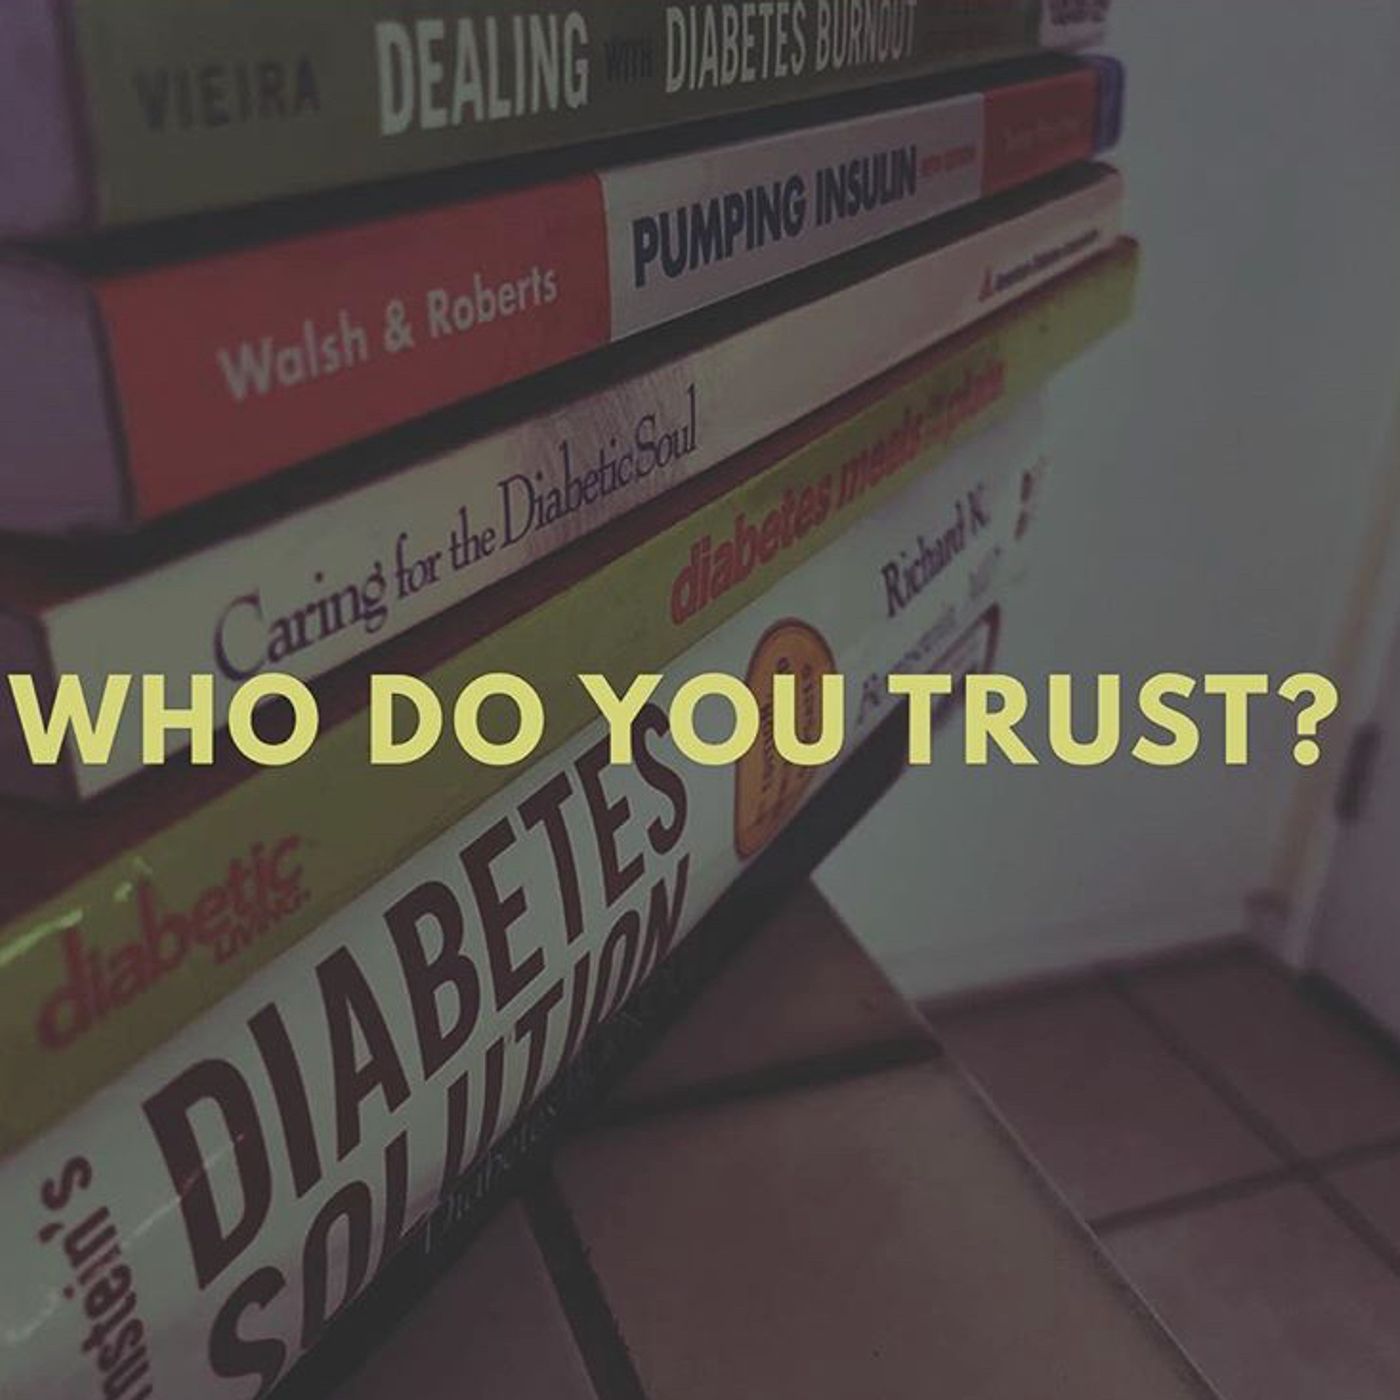 Who Do You Trust For Your Diabetes Care?